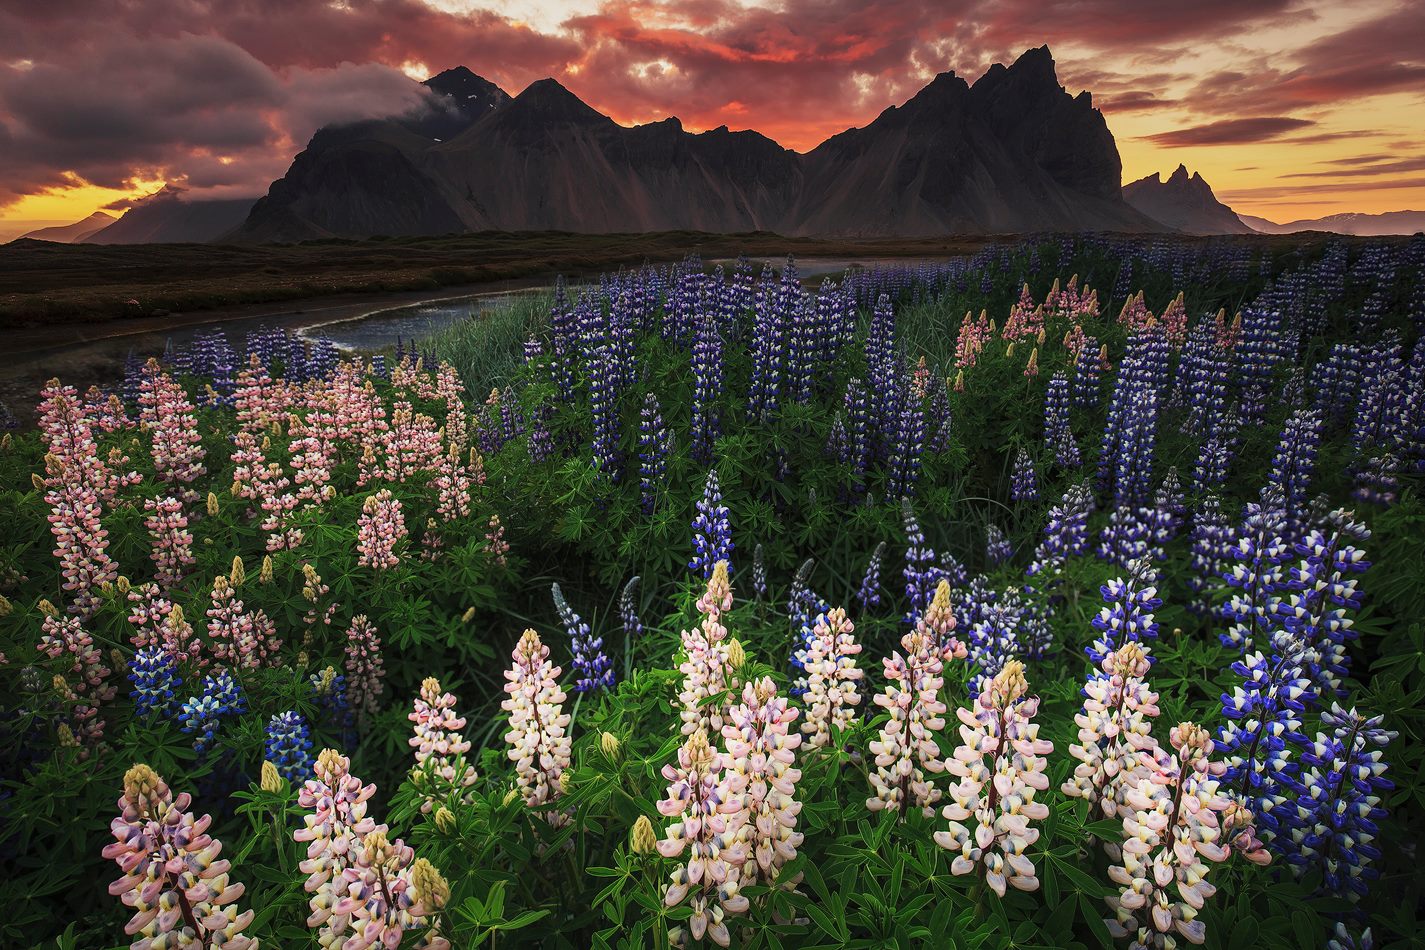 The beautiful Lupines of summer provide a perfect foreground for this wonderful sunset behind the dramatic peaks of Vestrahorn mountain.